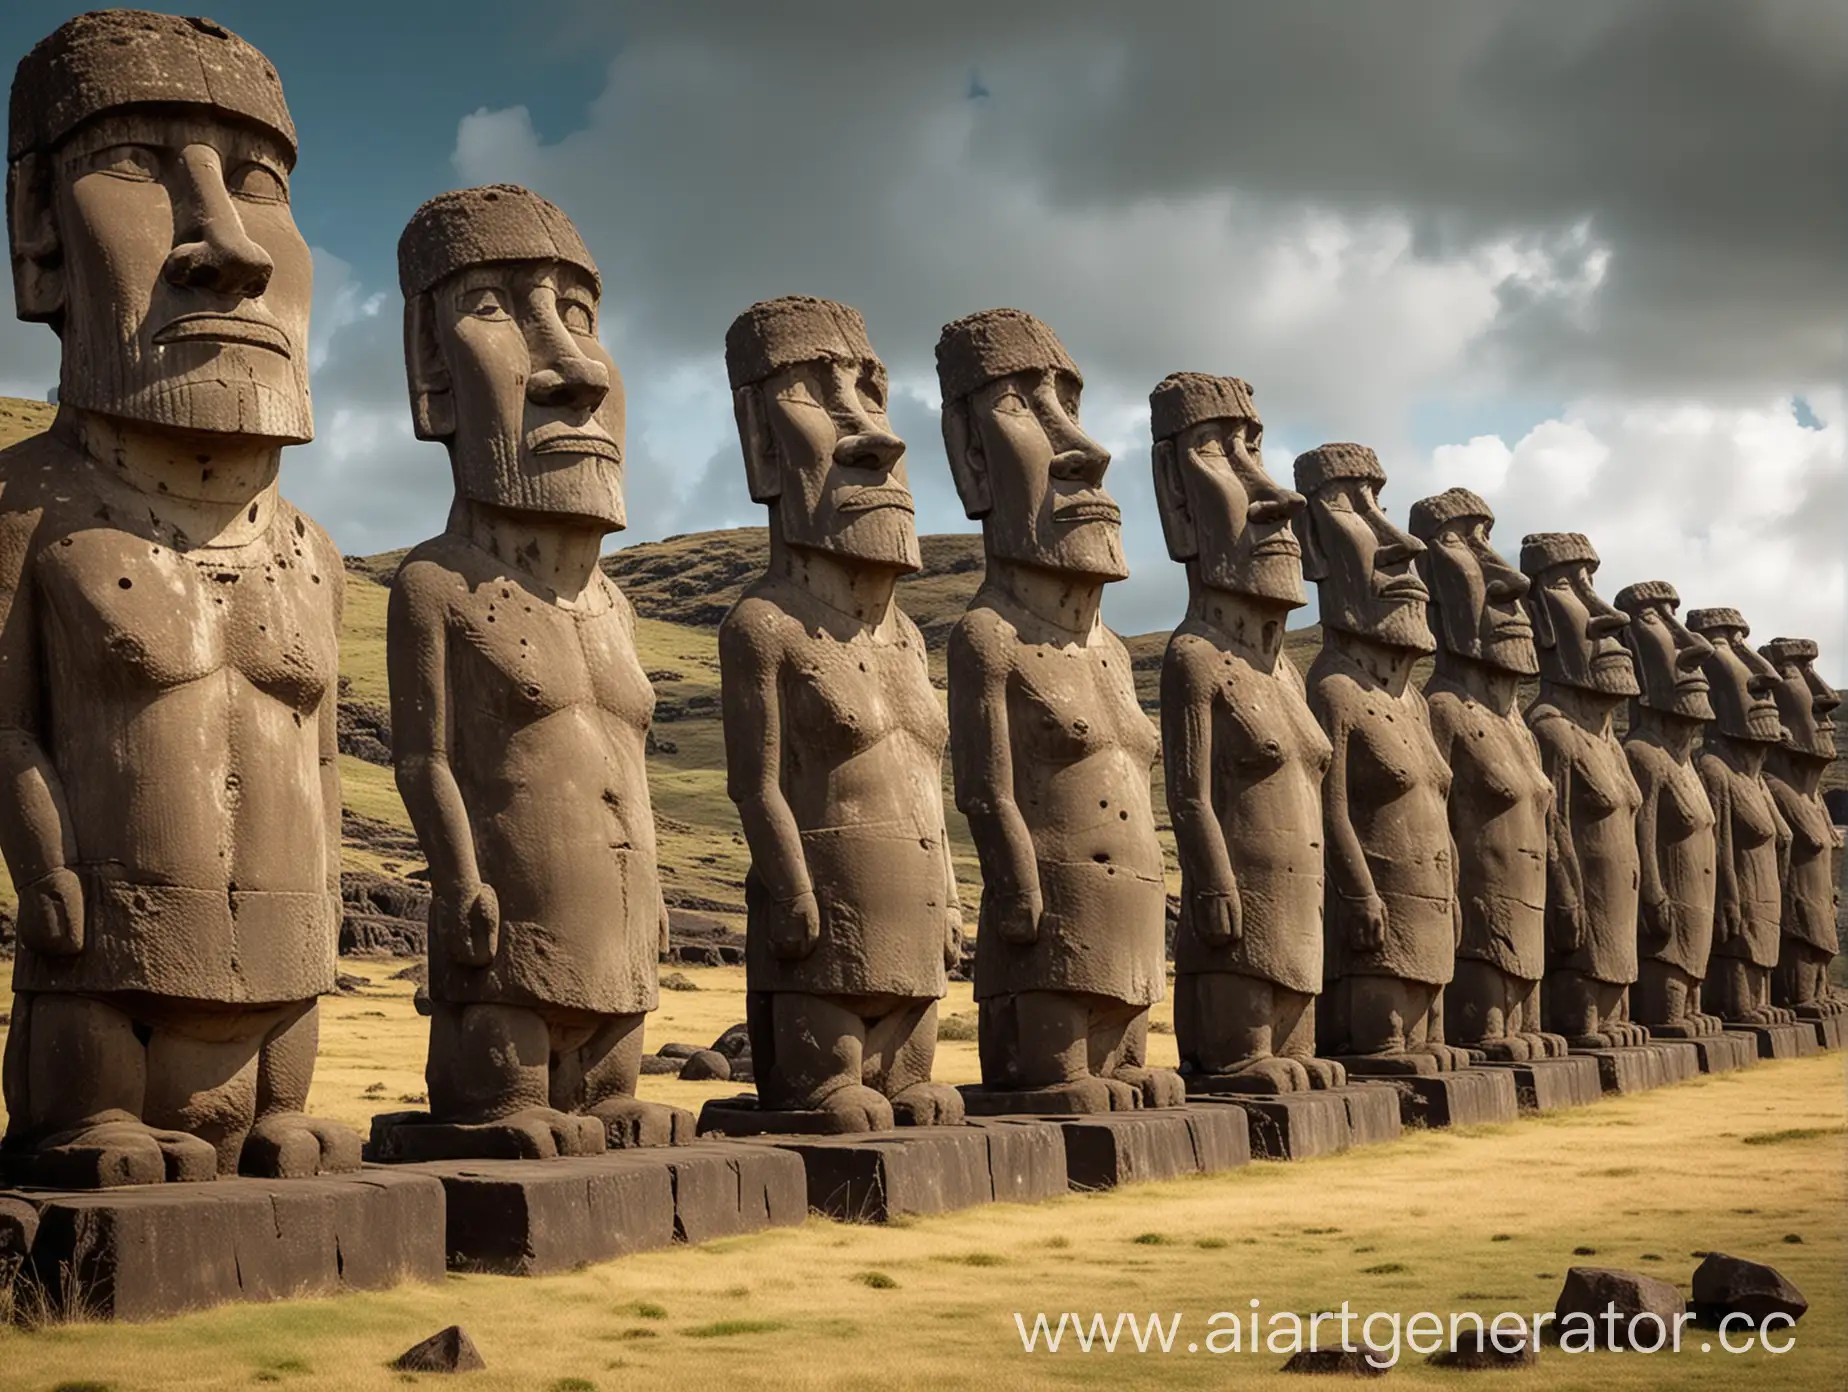 Create a horizontal illustration of the famous Moai stone statues from Easter Island. The statues should be standing in a line, looking directly at us. On the surface, only their heads with elongated faces, deep eye sockets, prominent noses, and massive chins should be visible. Underground, show the rest of their bodies with massive arms folded over their stomachs. The illustration should convey the mystery and grandeur of these ancient artifacts. The statues should be looking and standing right at us. Part of the Statue must be underground!!